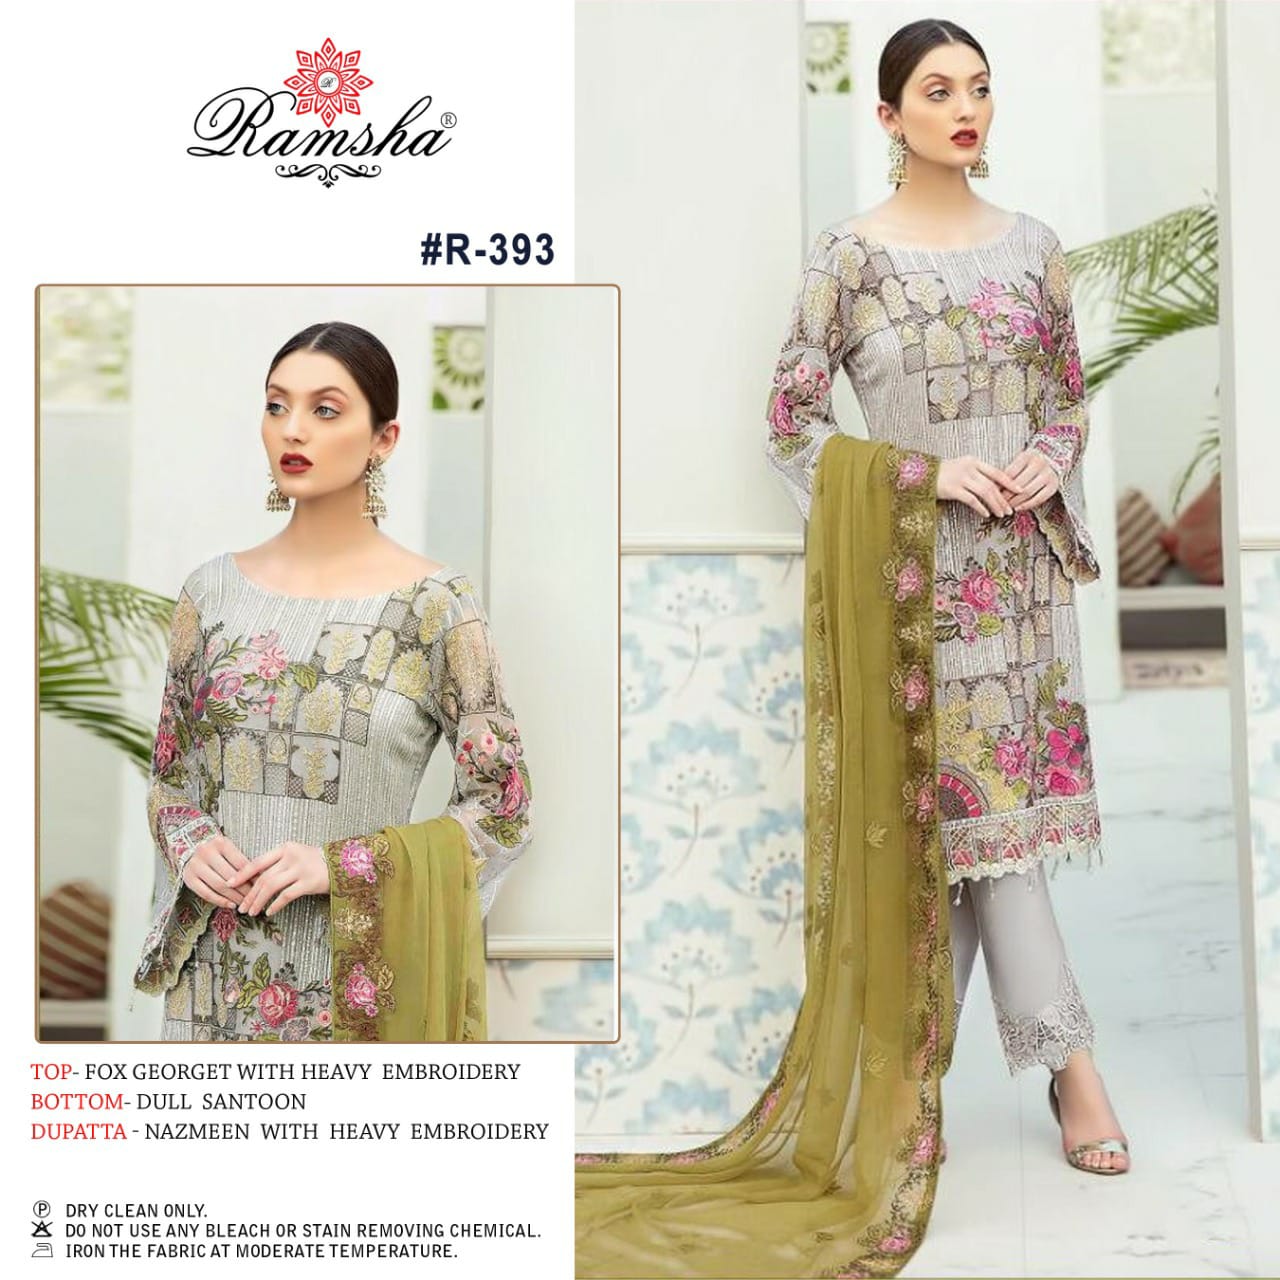 Ramsha Vol 30 Georgette With Embroidery Work Pakistani Suits Collection